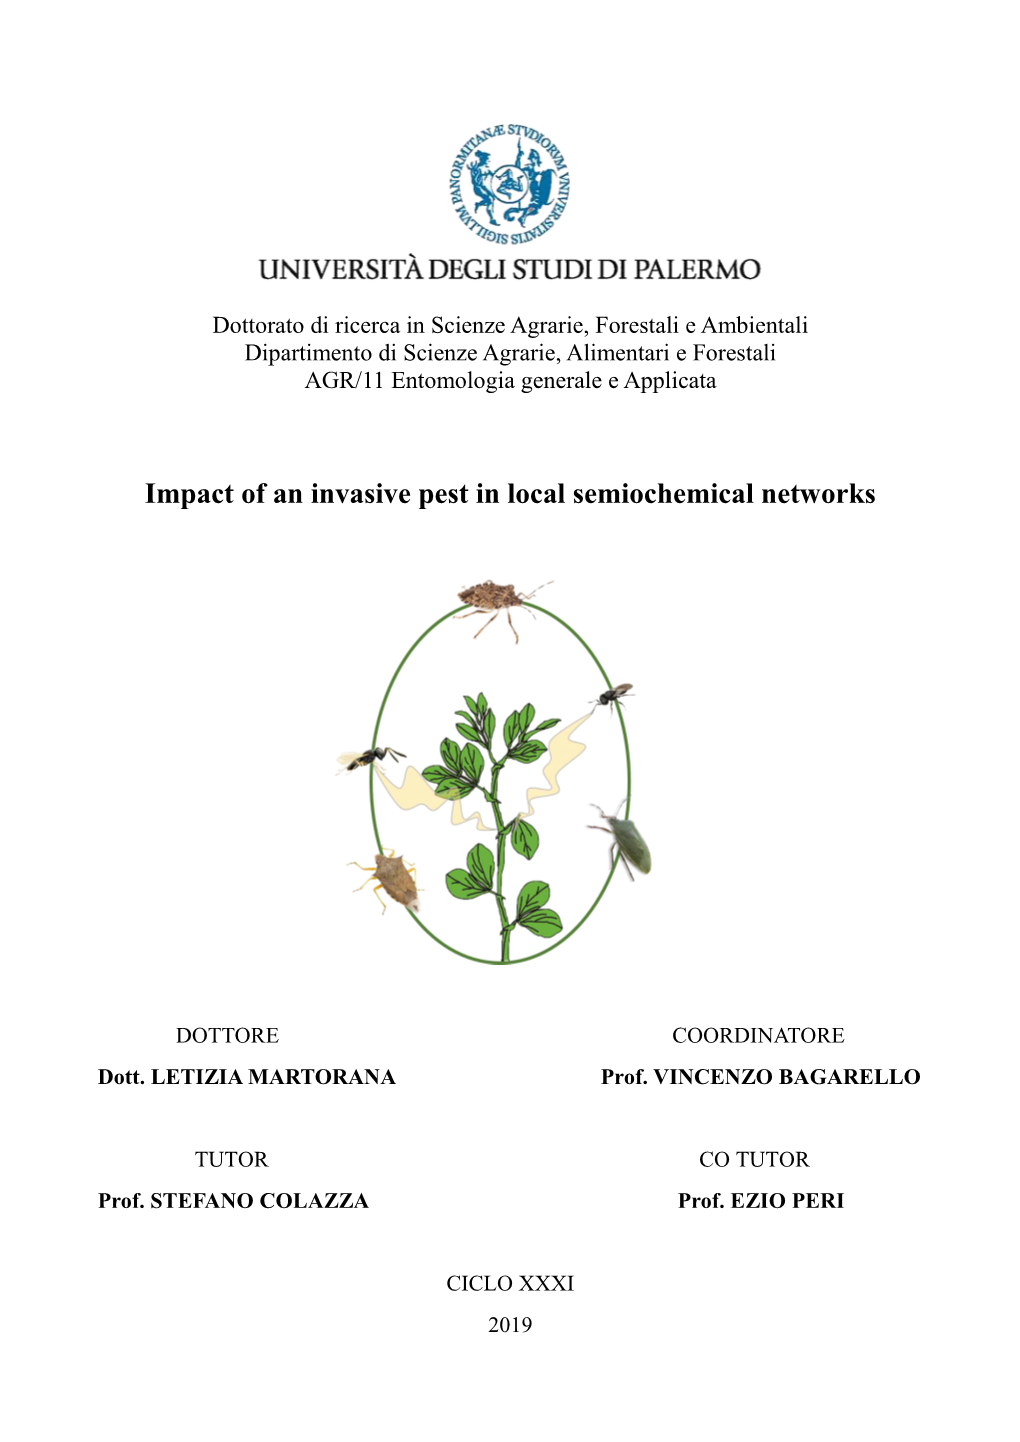 Impact of an Invasive Pest in Local Semiochemical Networks